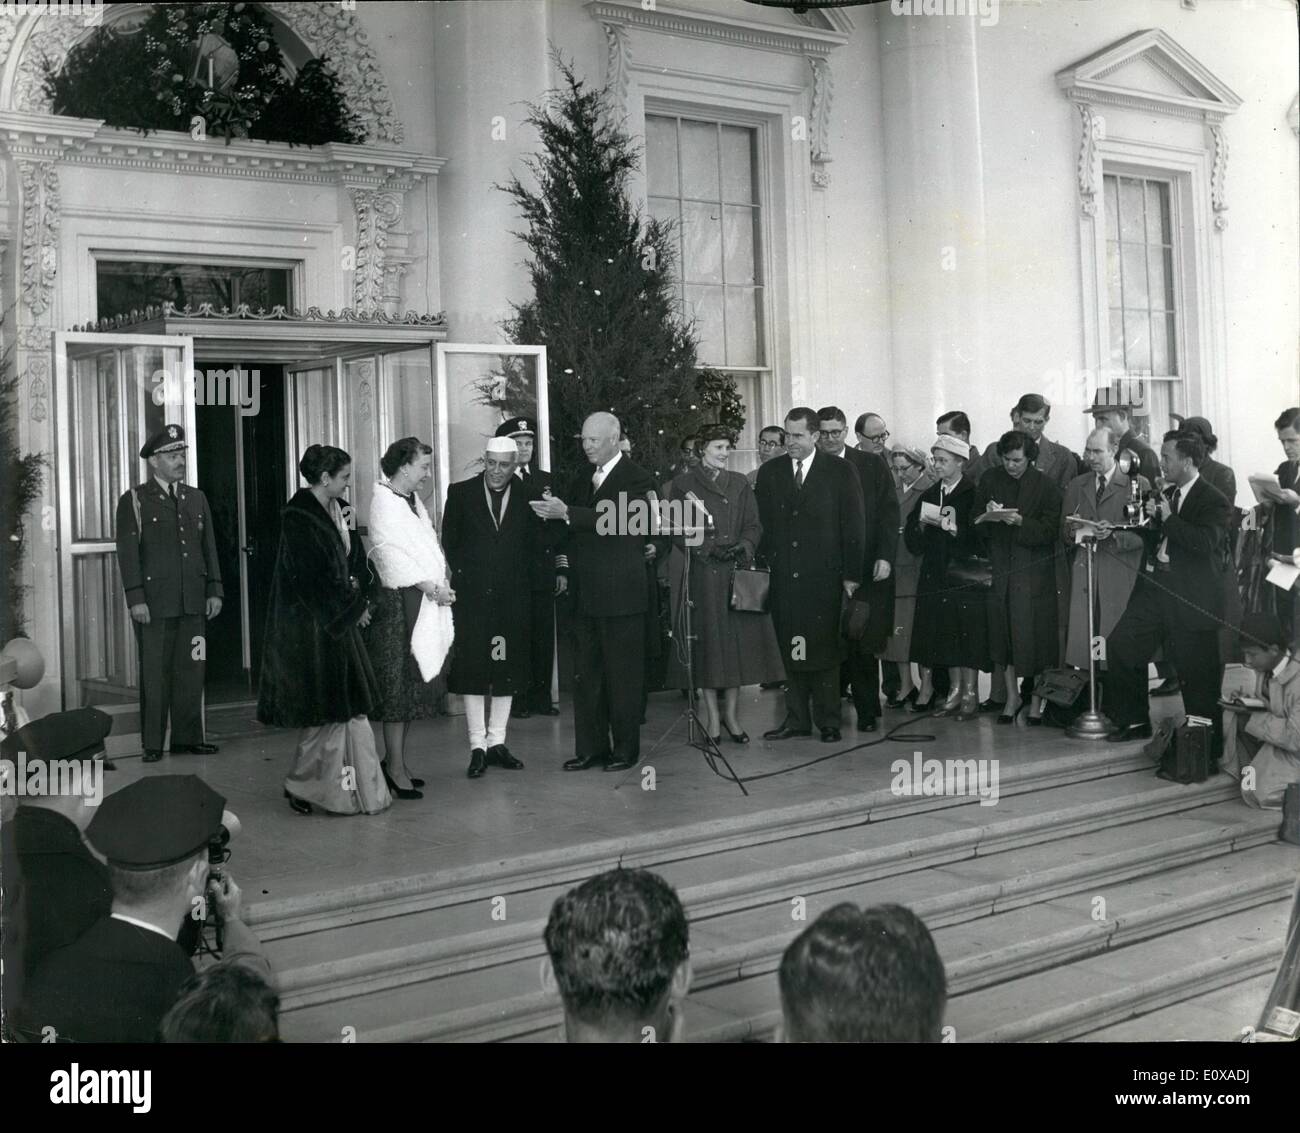 Jan. 01, 1966 - Mrs. Indira Gandhi Becomes India's First Woman Prime Minister: Photo shows (L. to R.) Mrs. Indira Gandhi, (daughter of Mr. Nehru) Mrs. Mamie Eisenhower, Mr. Nehru and Presidents Eisenhower, seen as they pose for pictures in front of the White House in Washington. Stock Photo